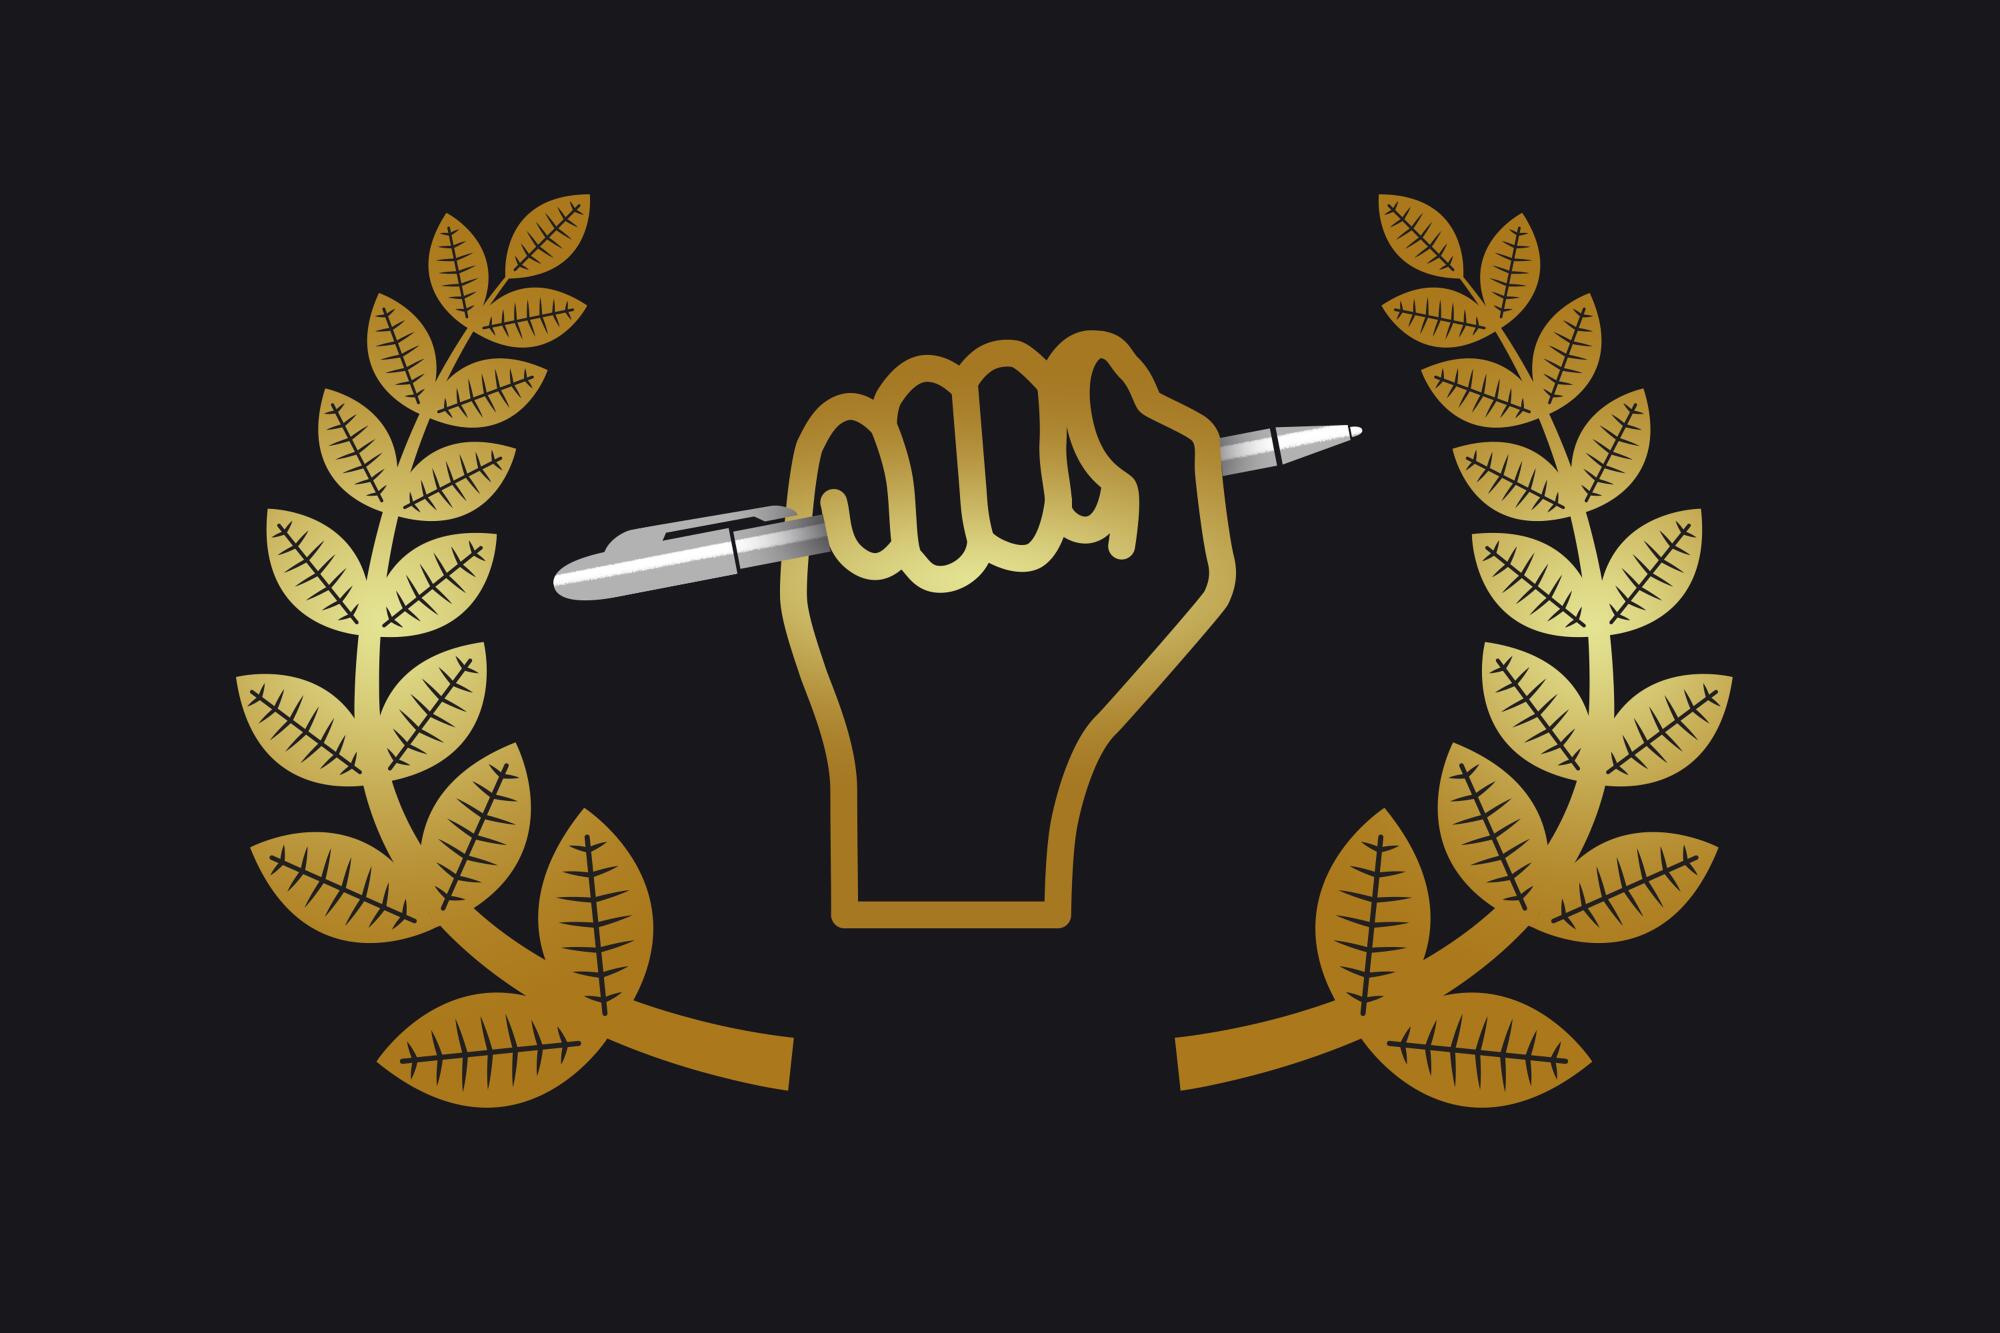 An illustration of a fist holding up a pencil surrounded by laurels